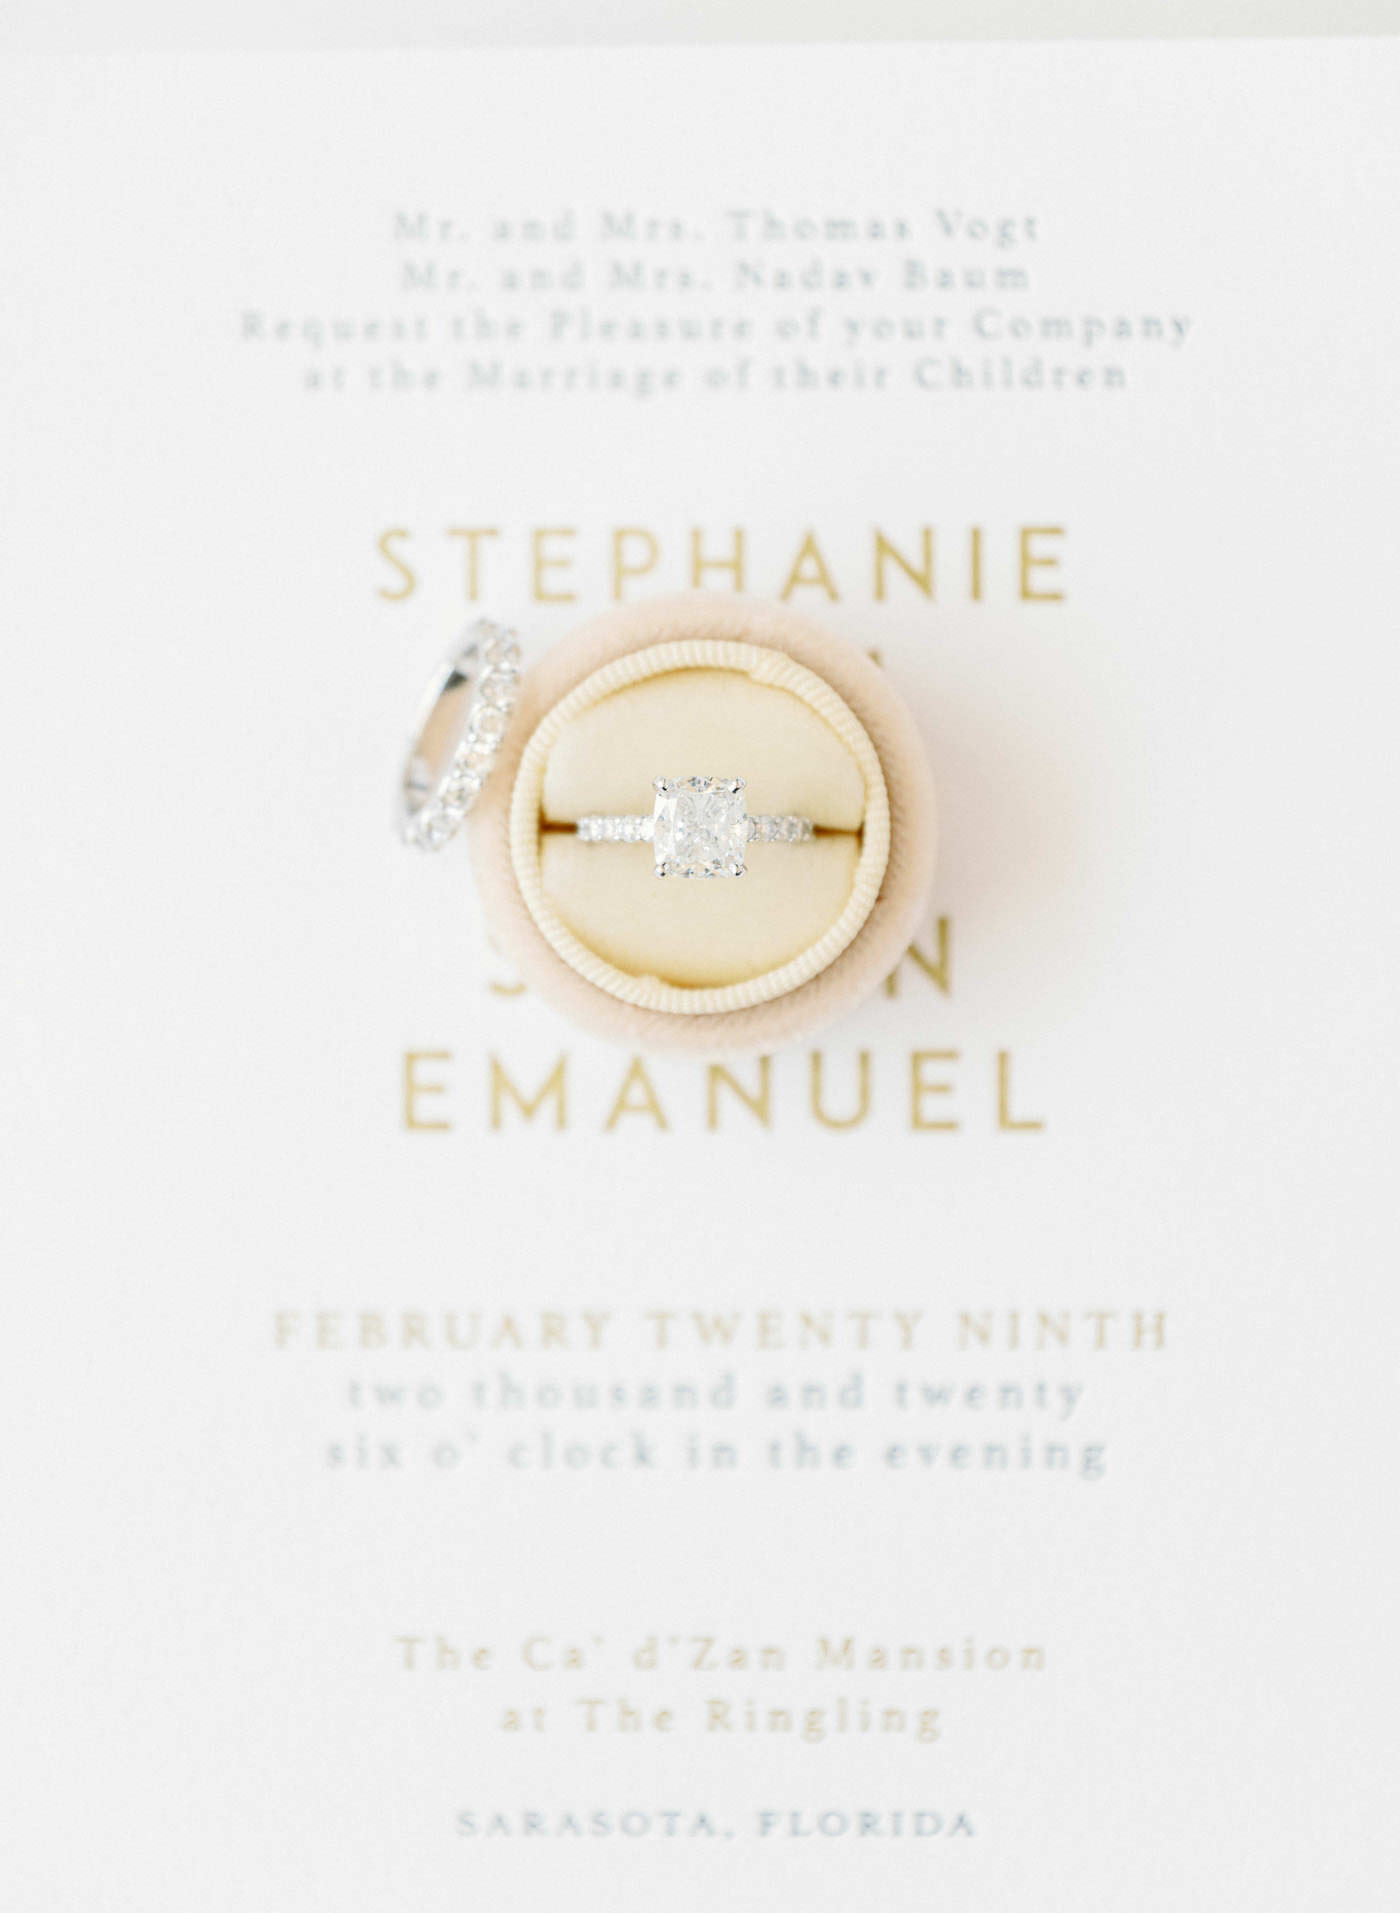 Florida Wedding and Engagement Ring, Round Diamond Solitaire Ring, Ivory Wedding Invitation with Gold Foil Block Lettering